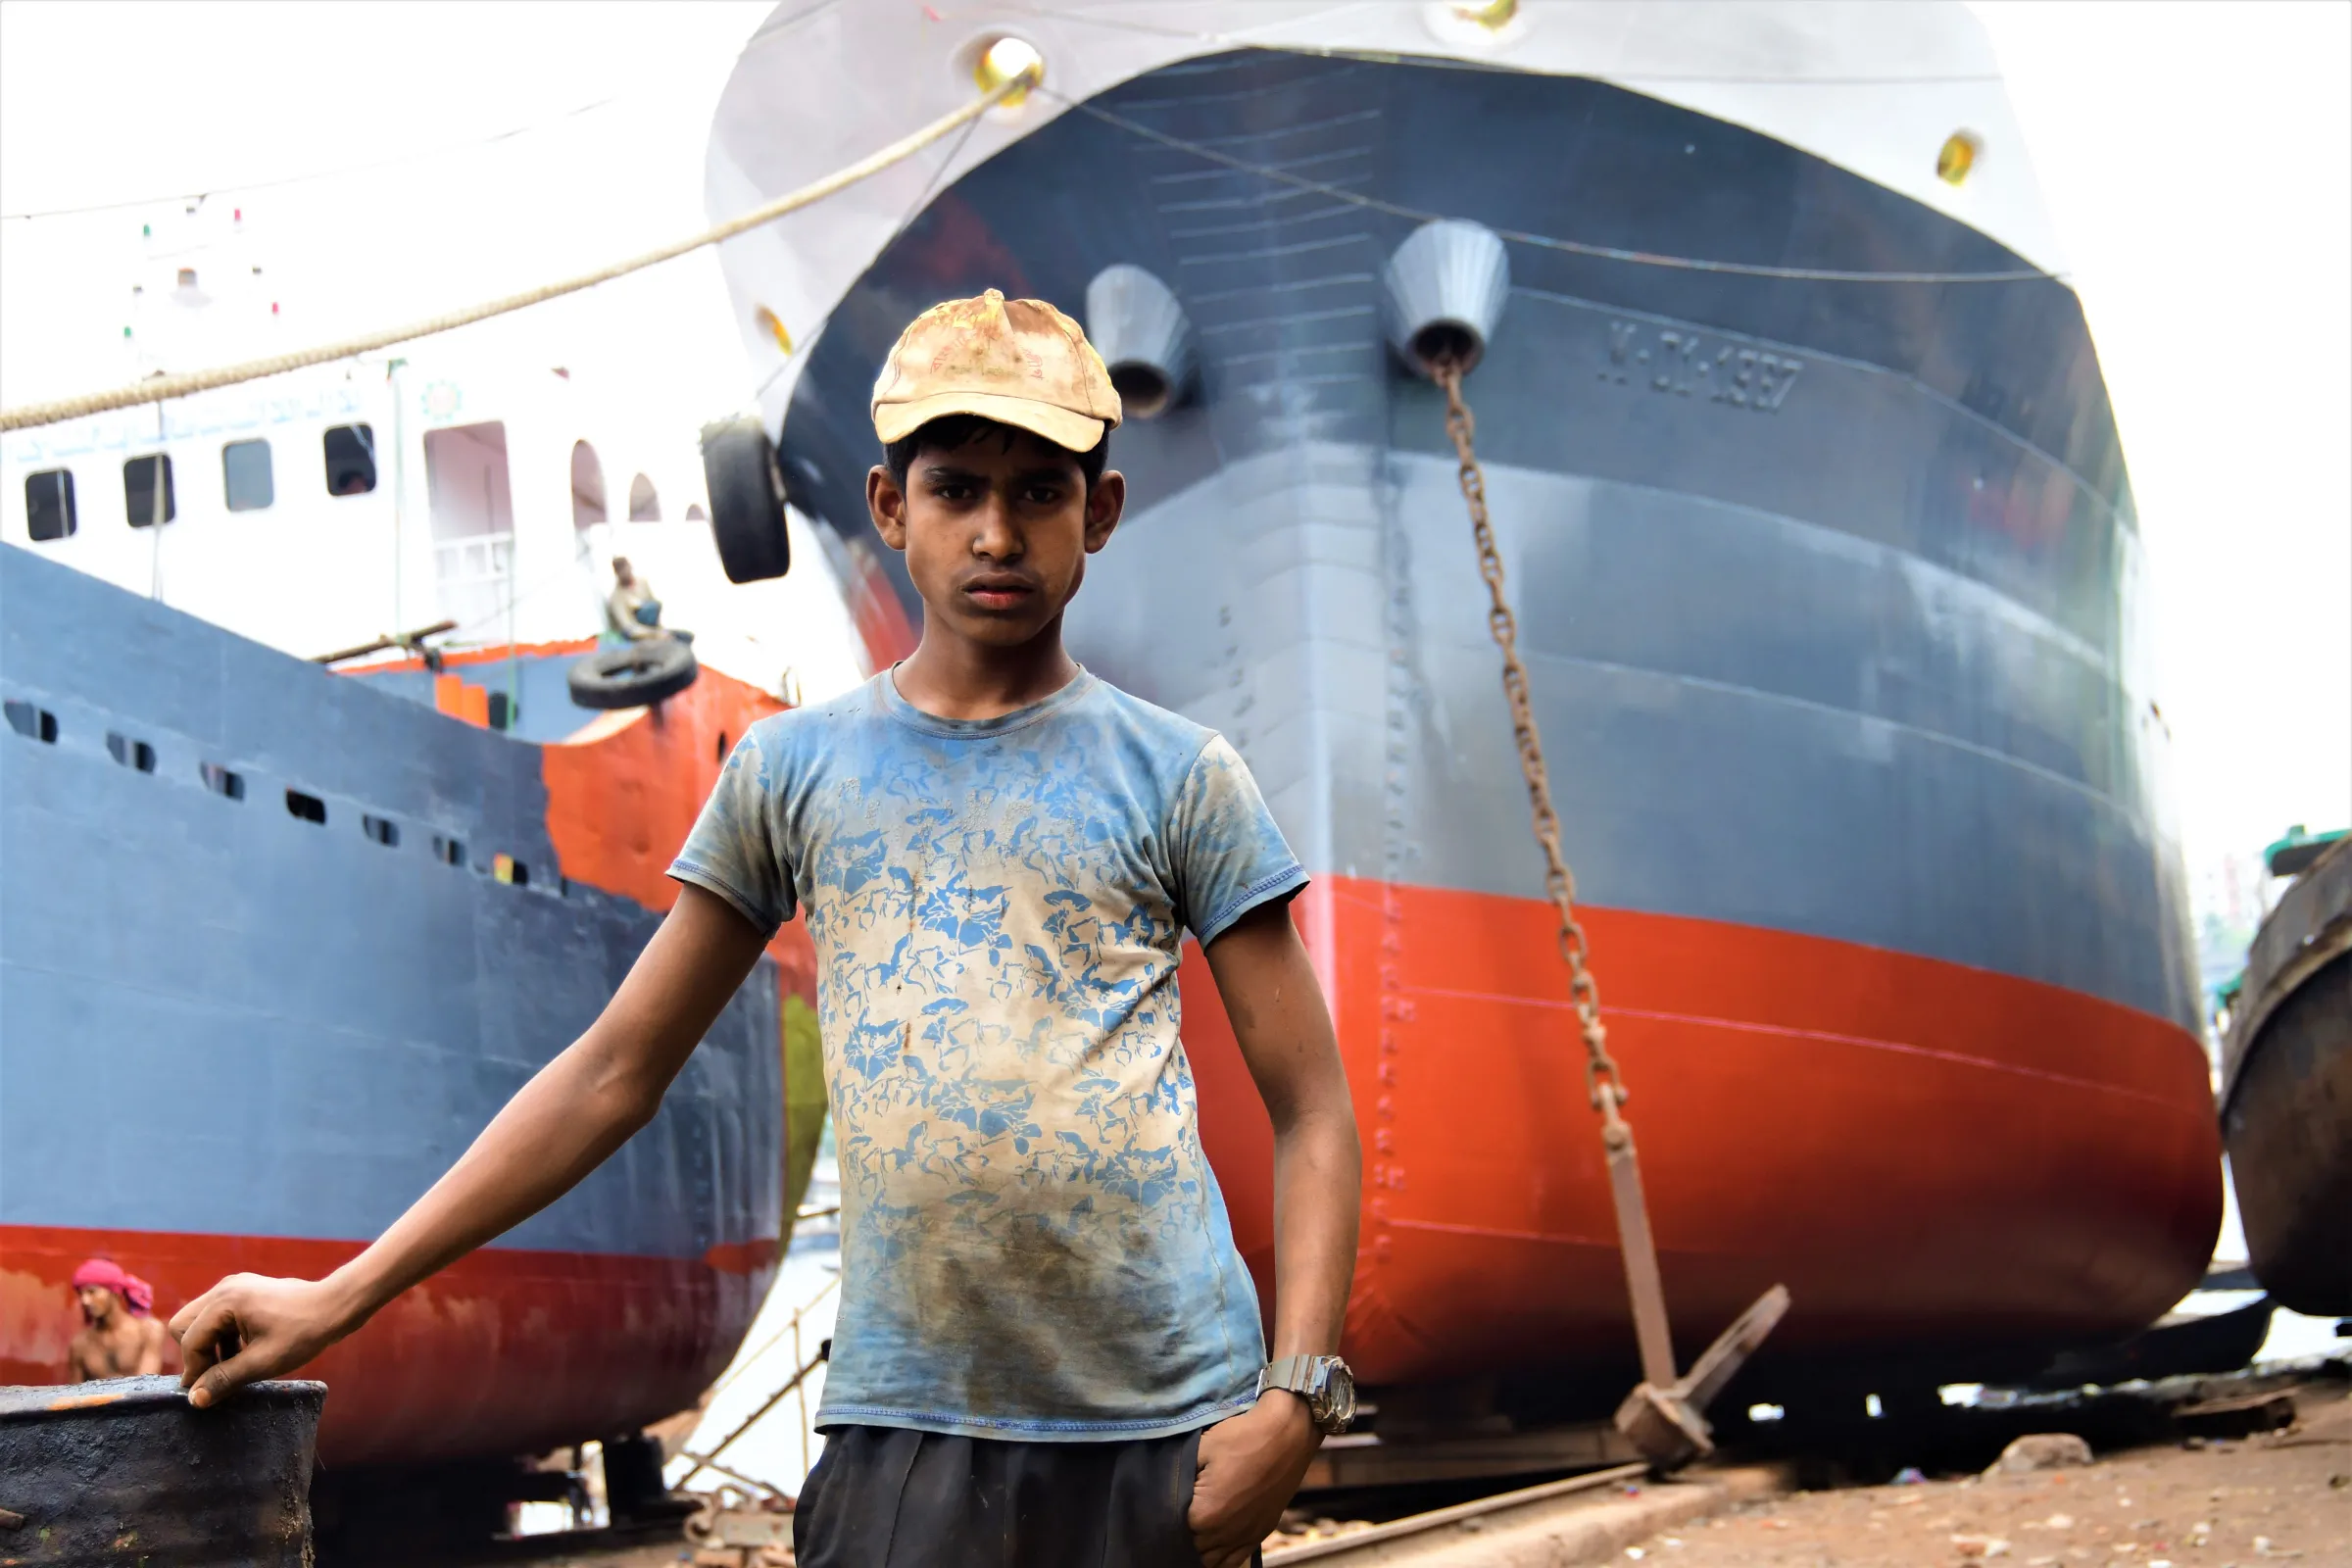 Alamin, 12, whose family lost their home to climate change-driven erosion, works as part of a shipbreaking crew in Keraniganj, close to Dhaka, Bangladesh, March 22, 2022. Thomson Reuters Foundation/Mosabber Hossain